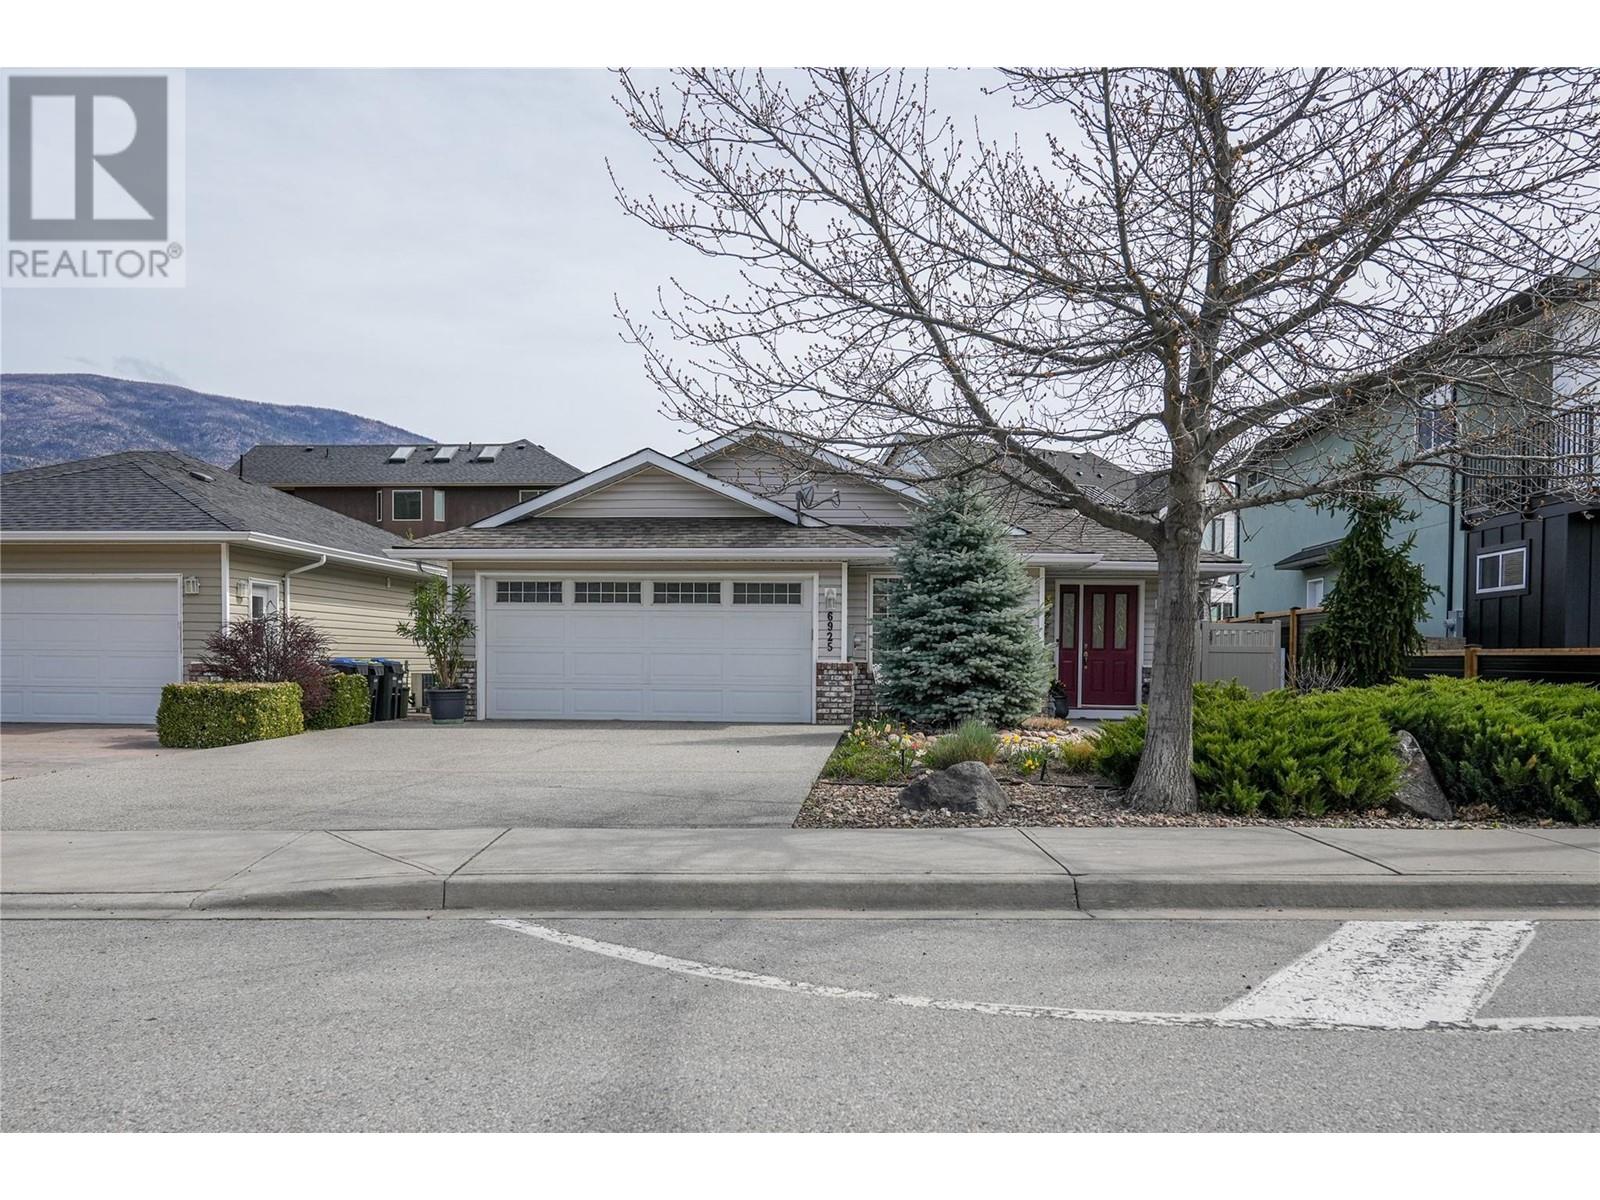 6925 Meadows Drive, Oliver, British Columbia  V0H 1T4 - Photo 2 - 10309007